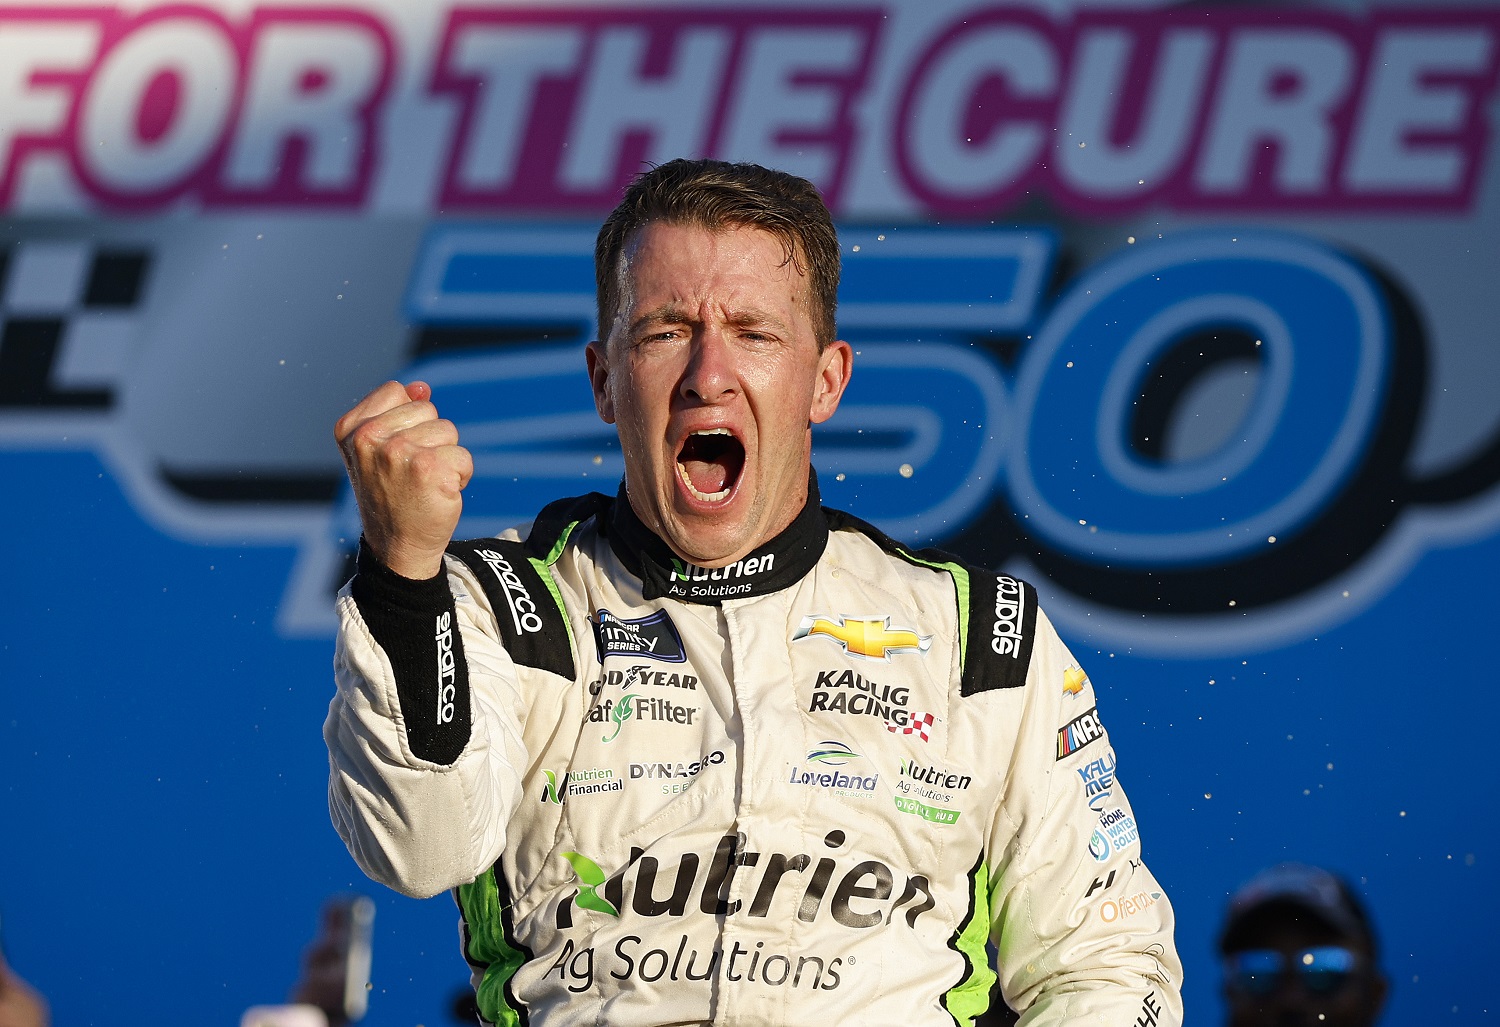 AJ Allmendinger celebrates in Victory Lane after winning the NASCAR Xfinity Series Drive for the Cure 250 at Charlotte Motor Speedway on Oct. 8, 2022, in Concord, North Carolina.